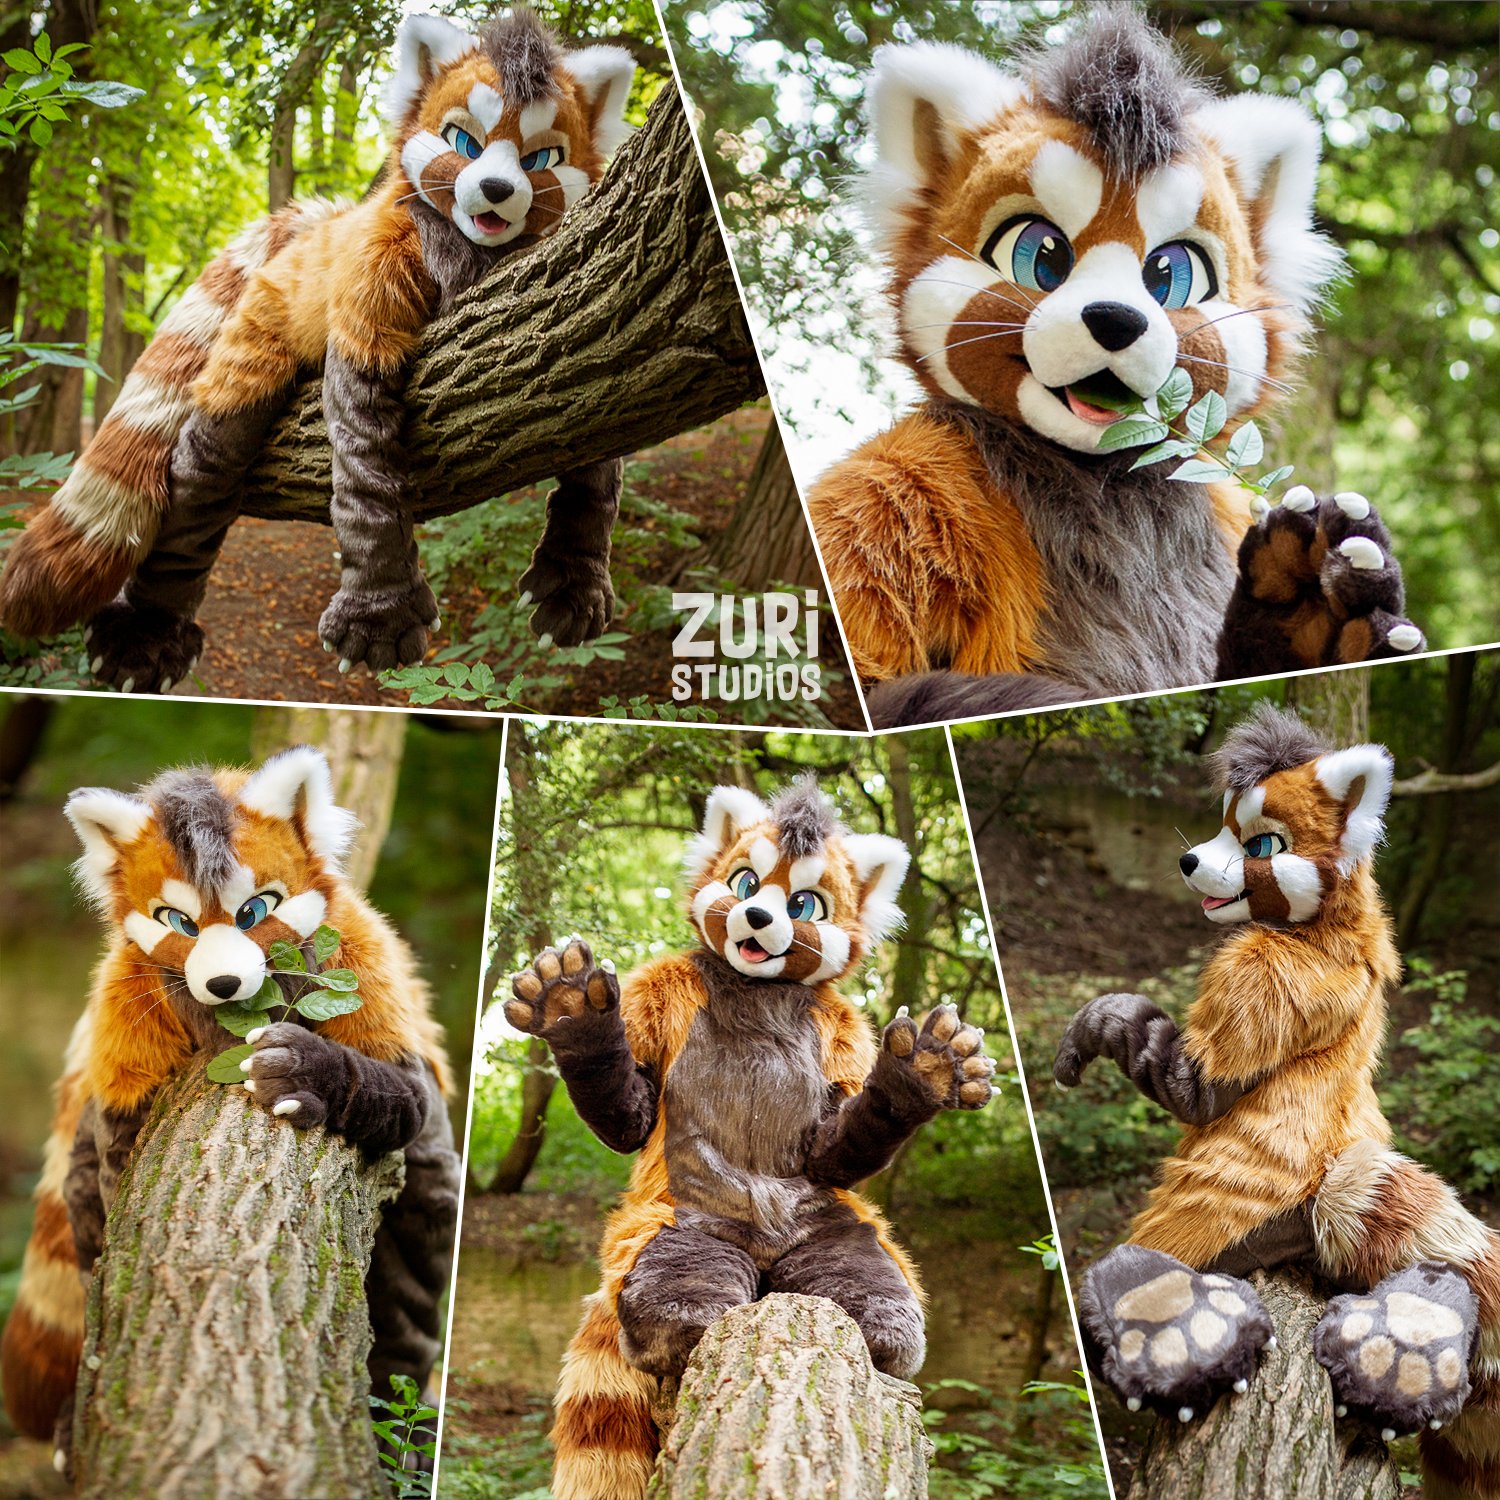 Zuri Studios on Twitter: "✨My newly finished suit, this time a cute red ✂️: @Zuri_Studios 📸: @FurCPhoto 🐼: @ScampRedPanda / Twitter